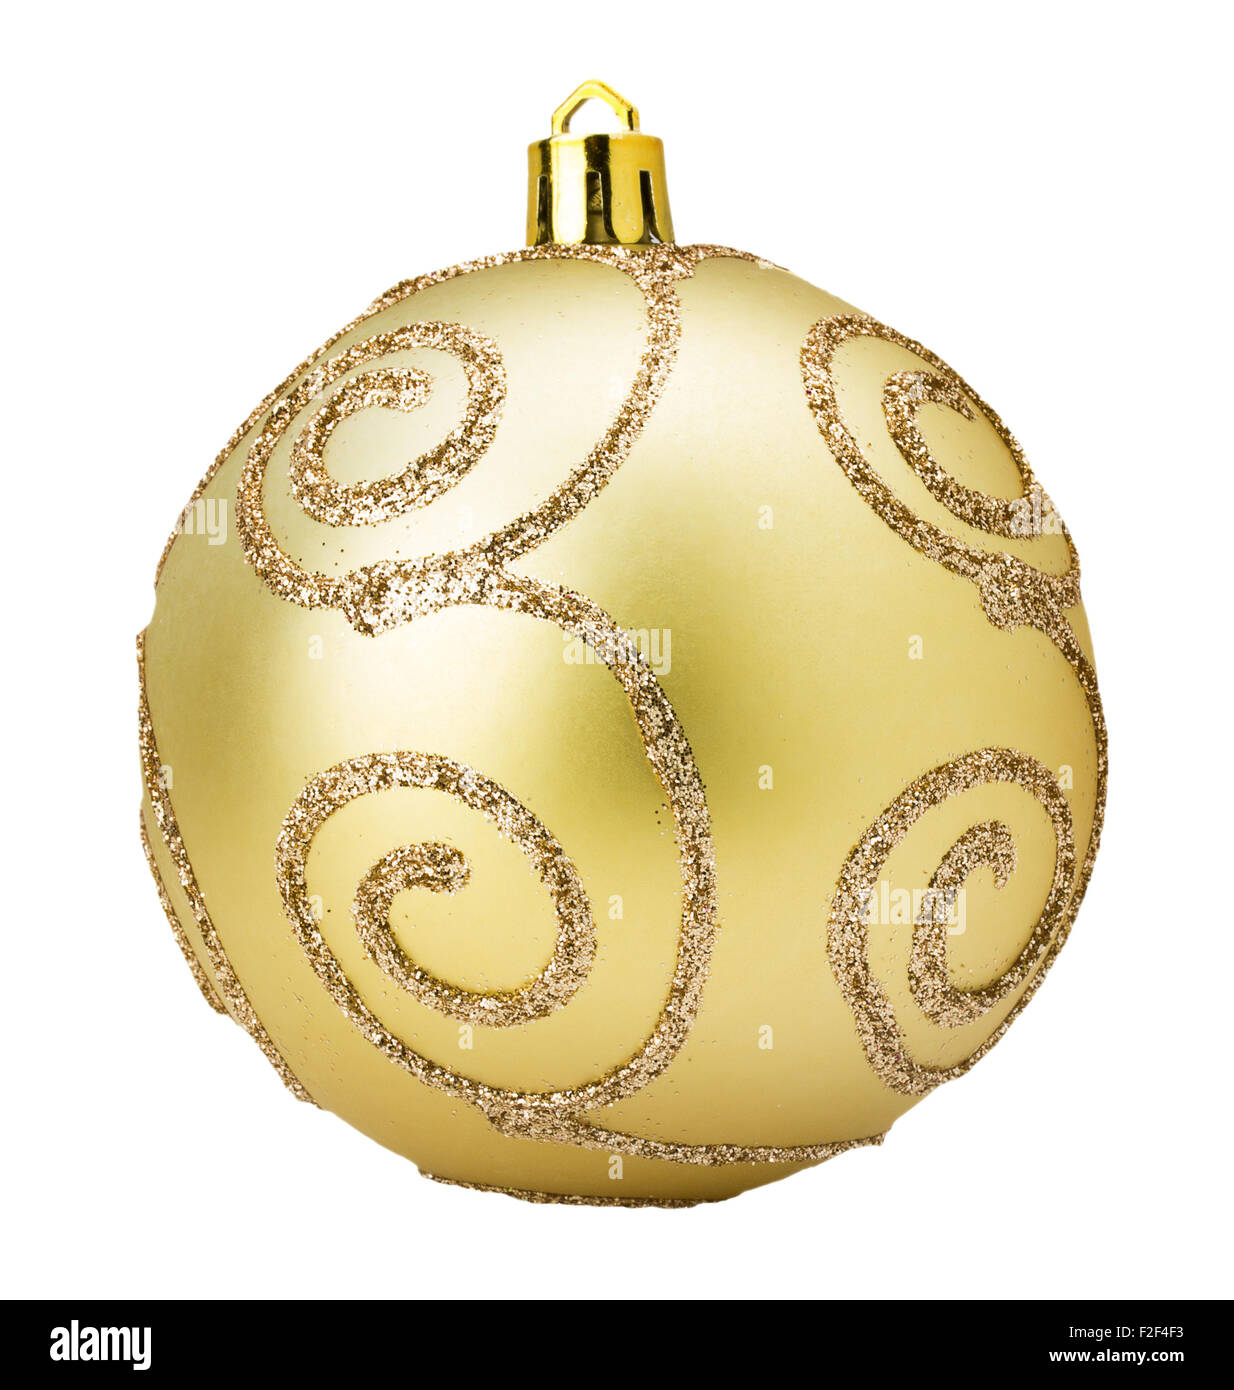 golden Christmas tree ball isolated on the white background. Stock Photo